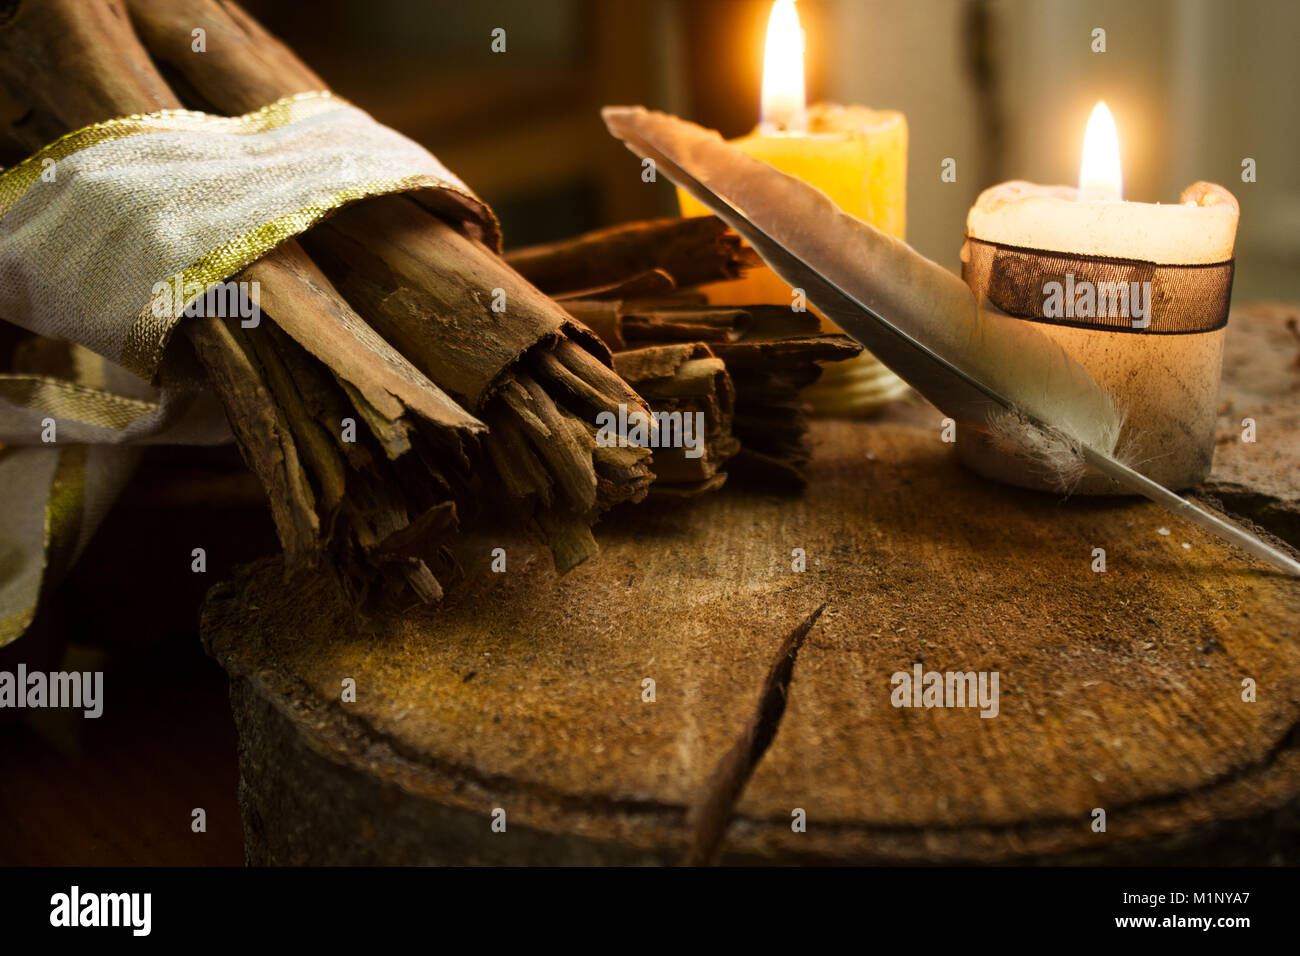 Cinnamon sticks on wood with candles, and feather Stock Photo